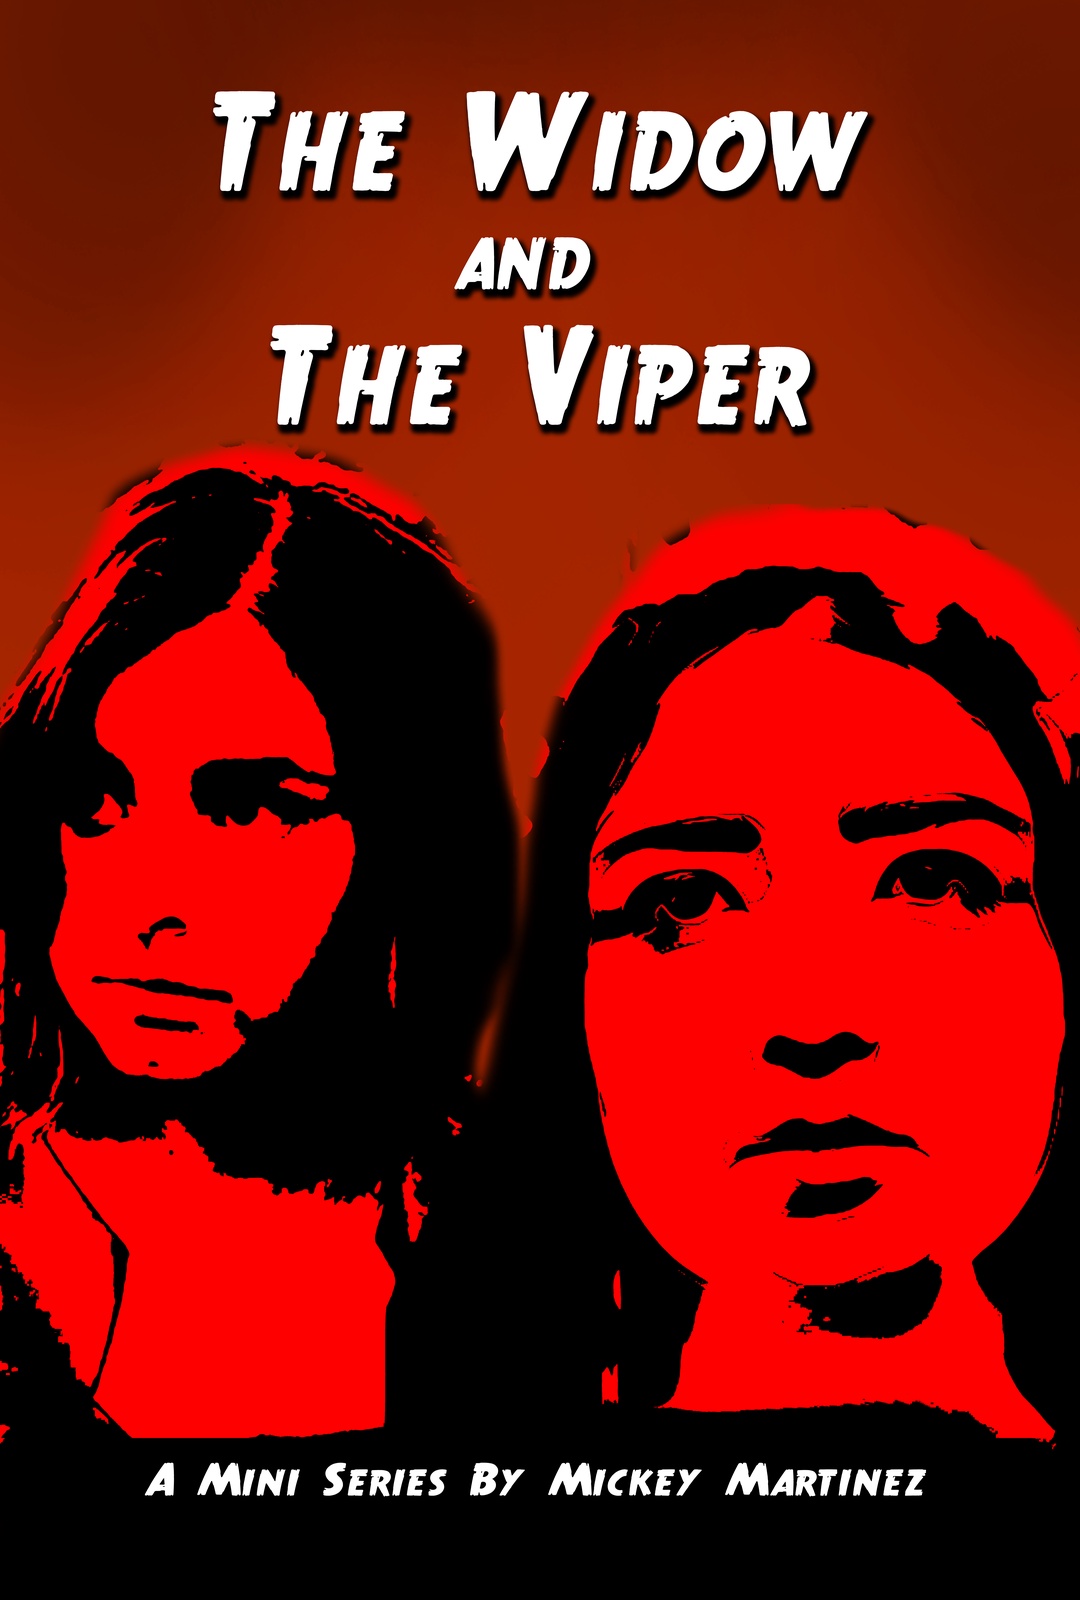 The Widow and the Viper